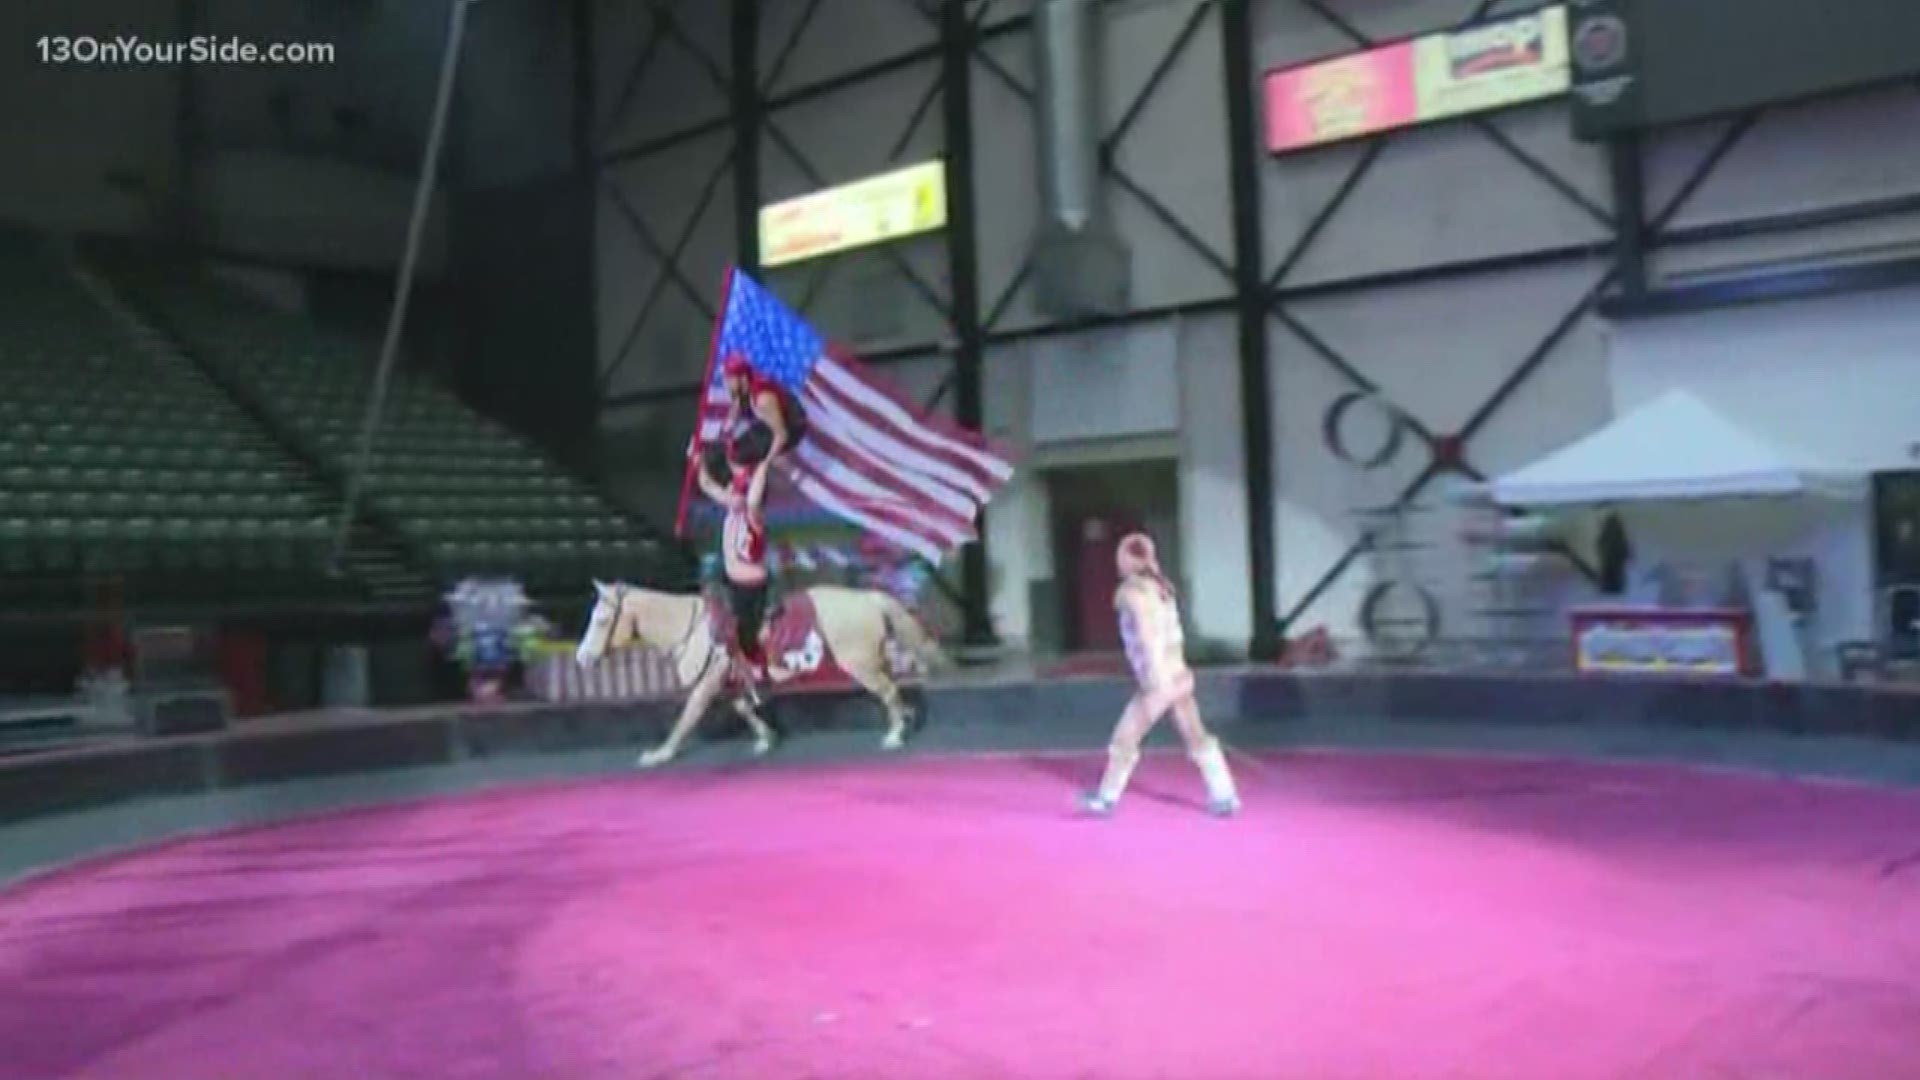 Shrine Circus comes to the DeltaPlex this weekend